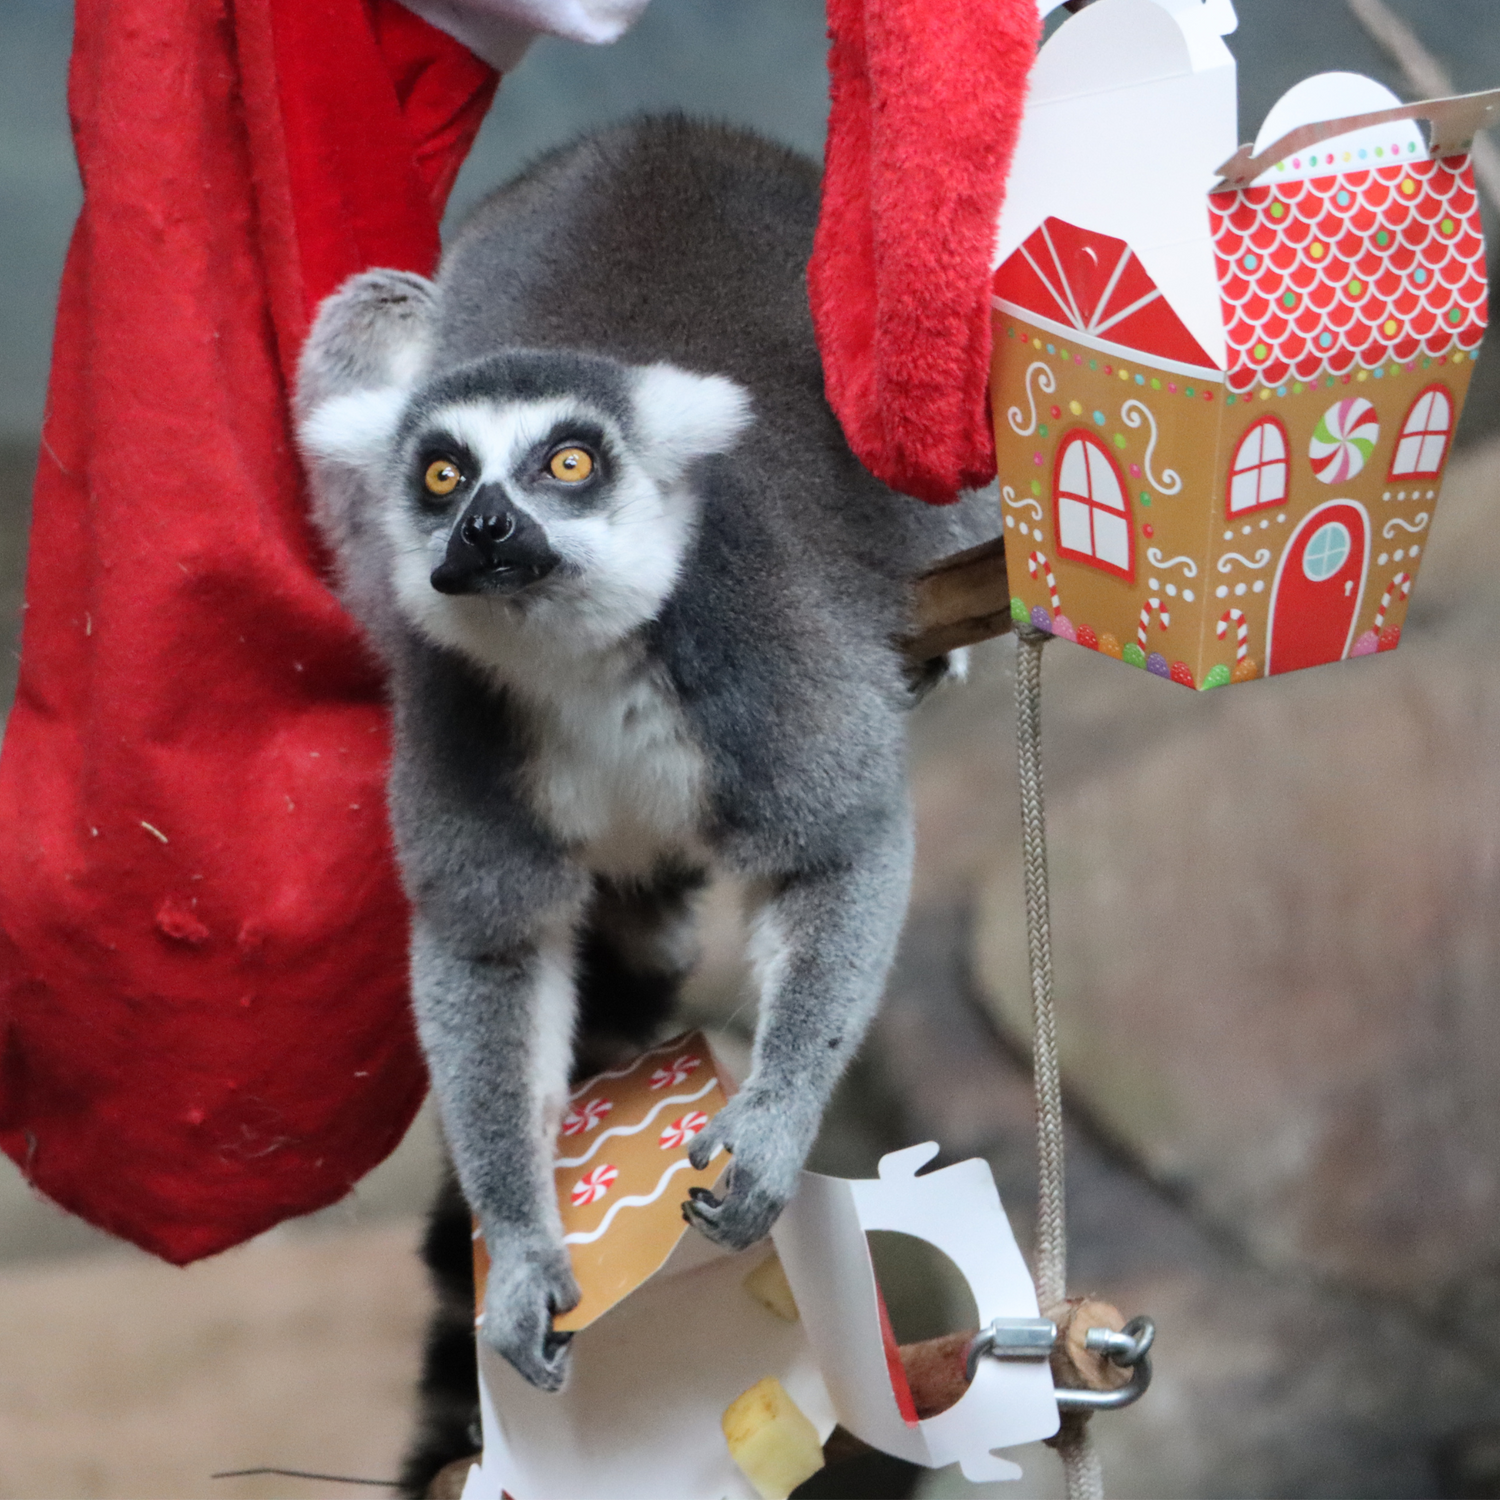 A lemur with a gift box and a stocking